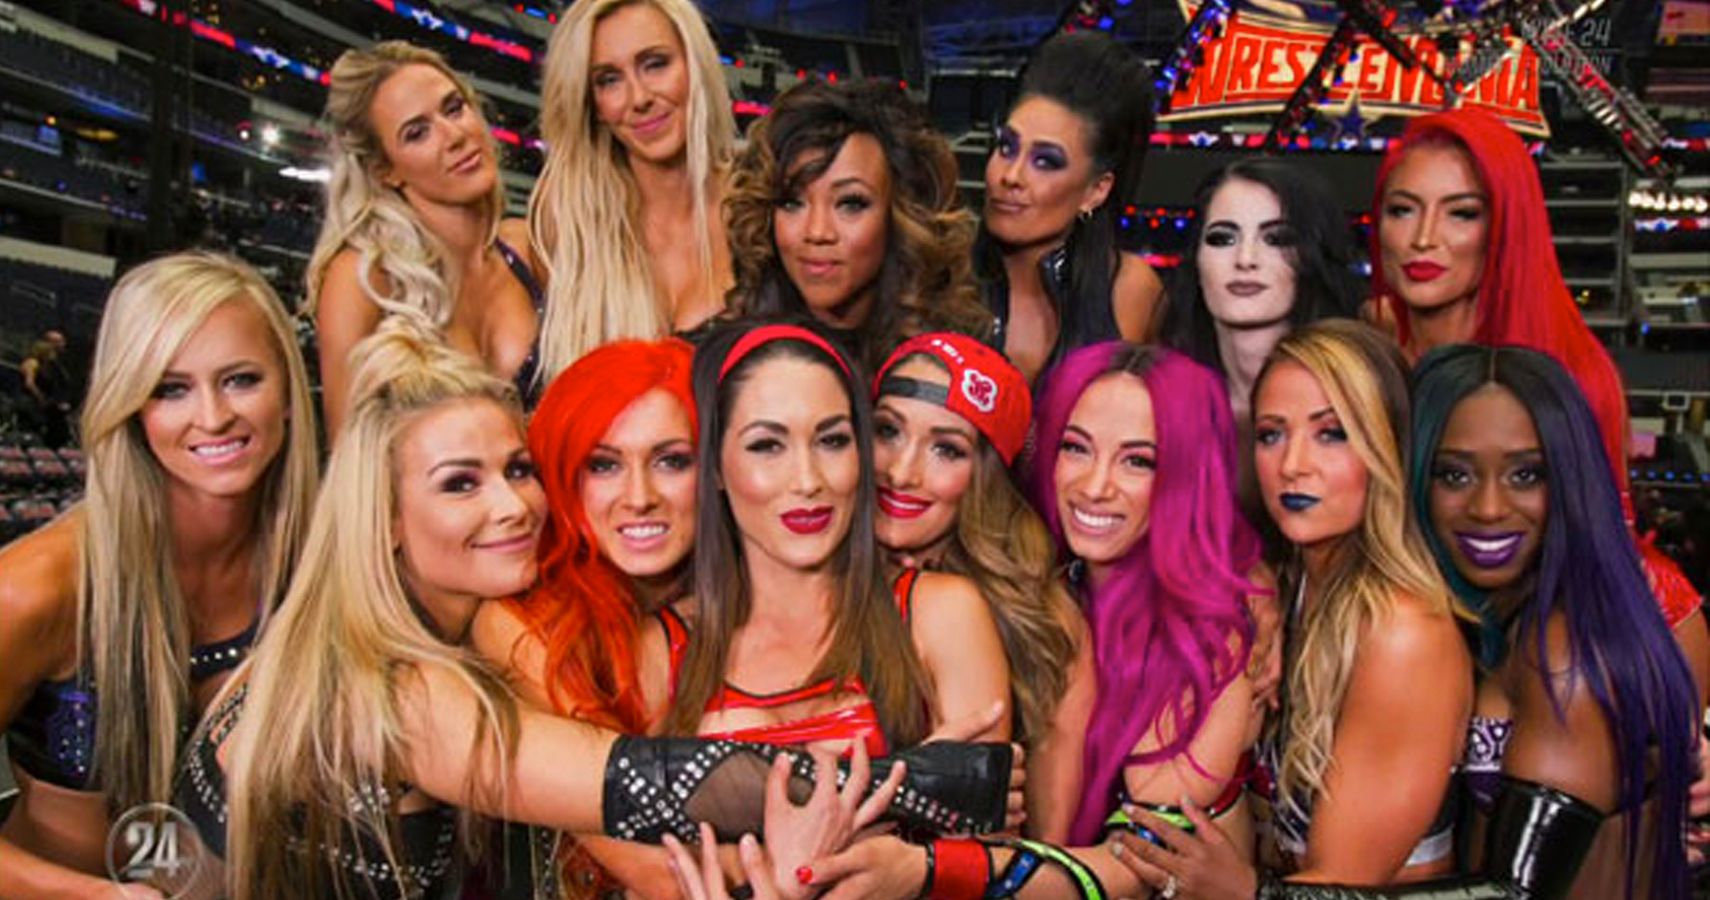 WWE Royal Rumble Are They Planning An AllWomen Battle Royal?